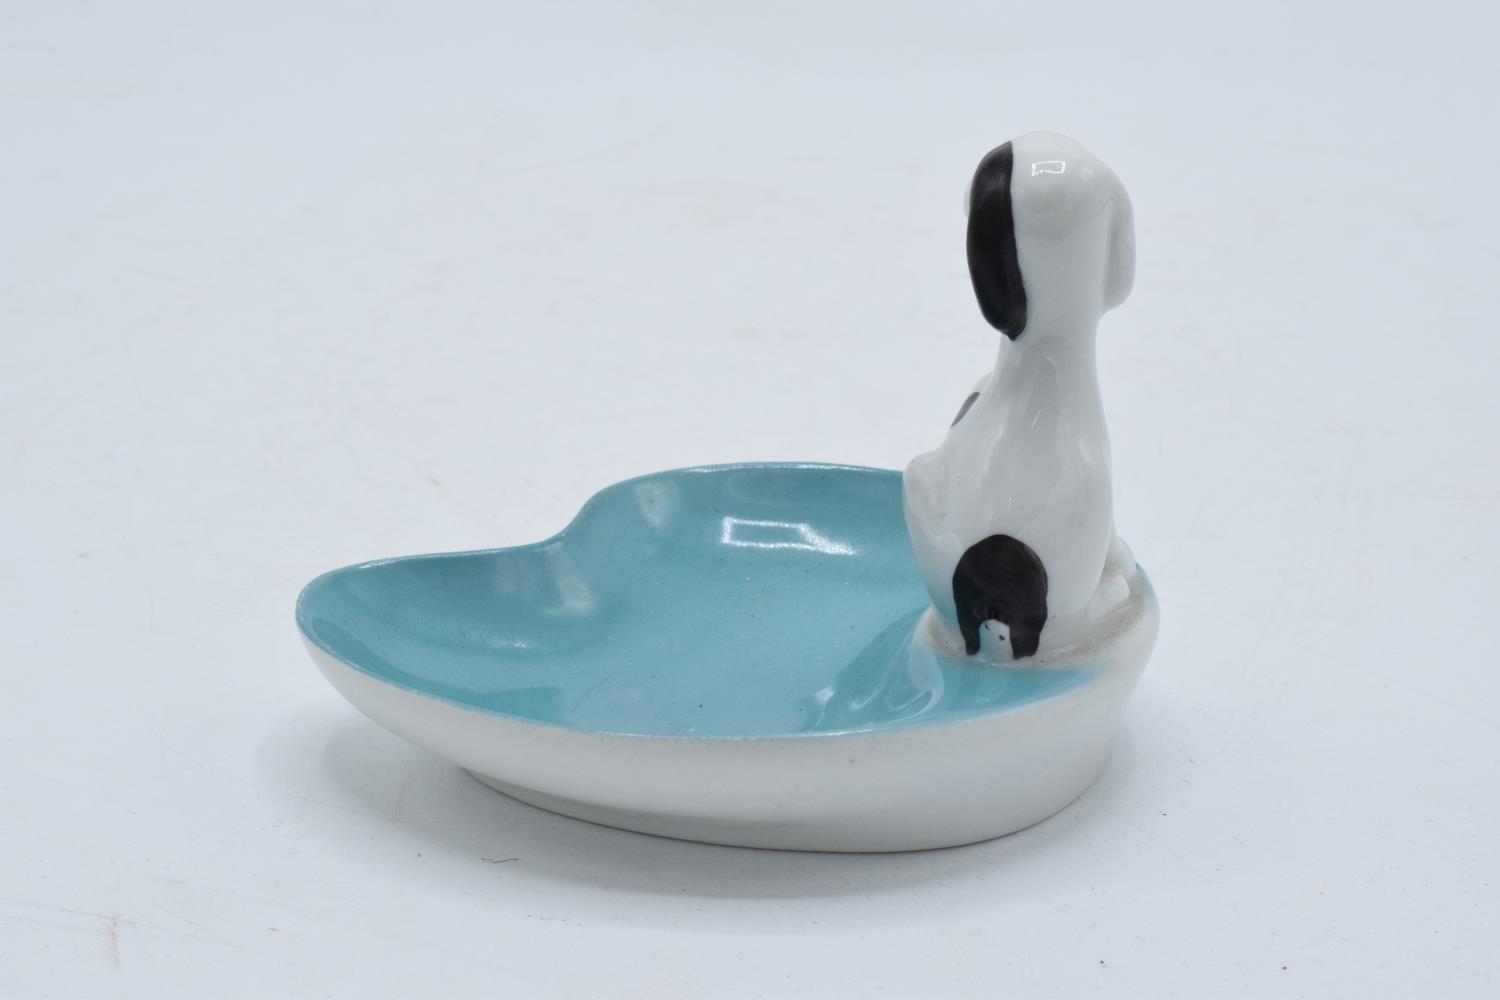 A Tosca Fine China of Germany model of a dog ashtray. In good condition with no obvious damage or - Image 2 of 3